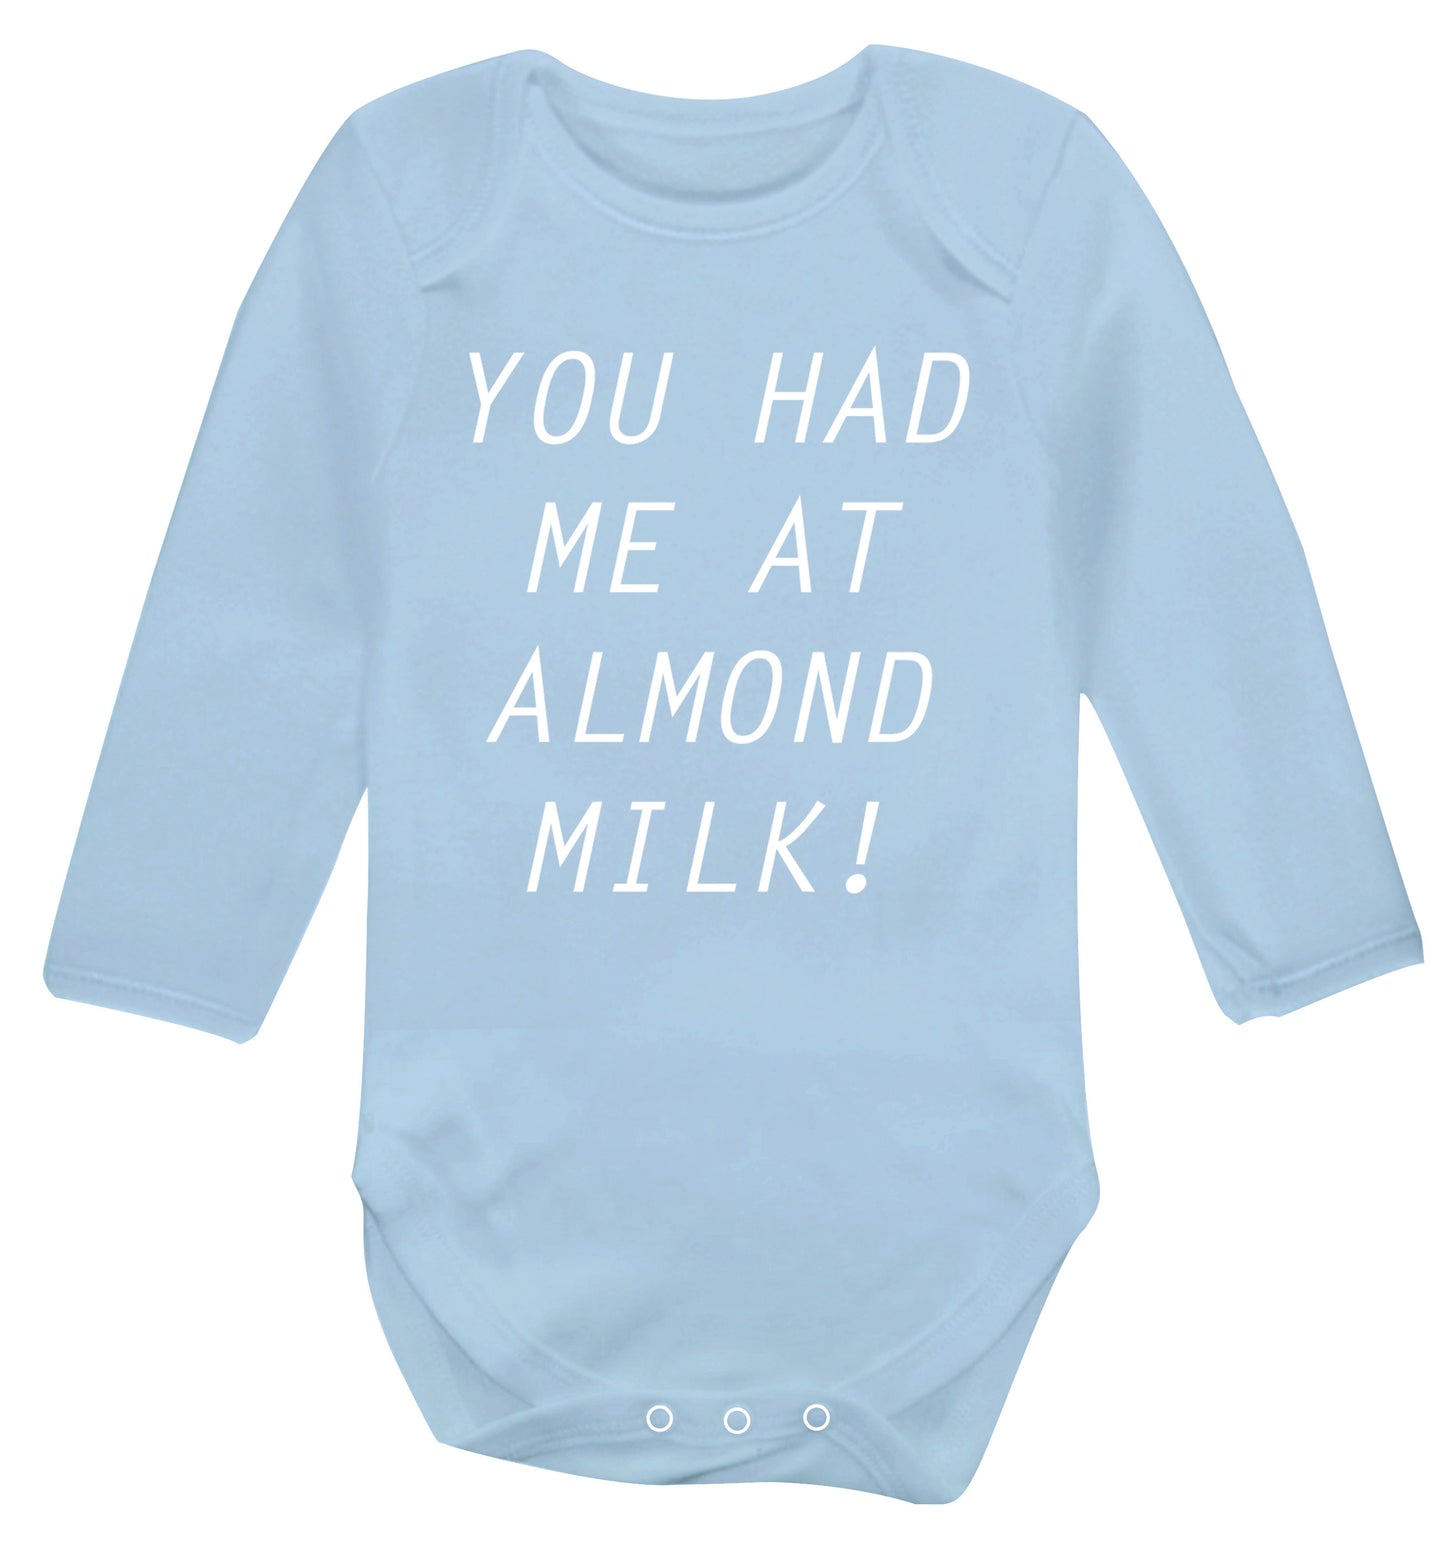 You had me at almond milk Baby Vest long sleeved pale blue 6-12 months